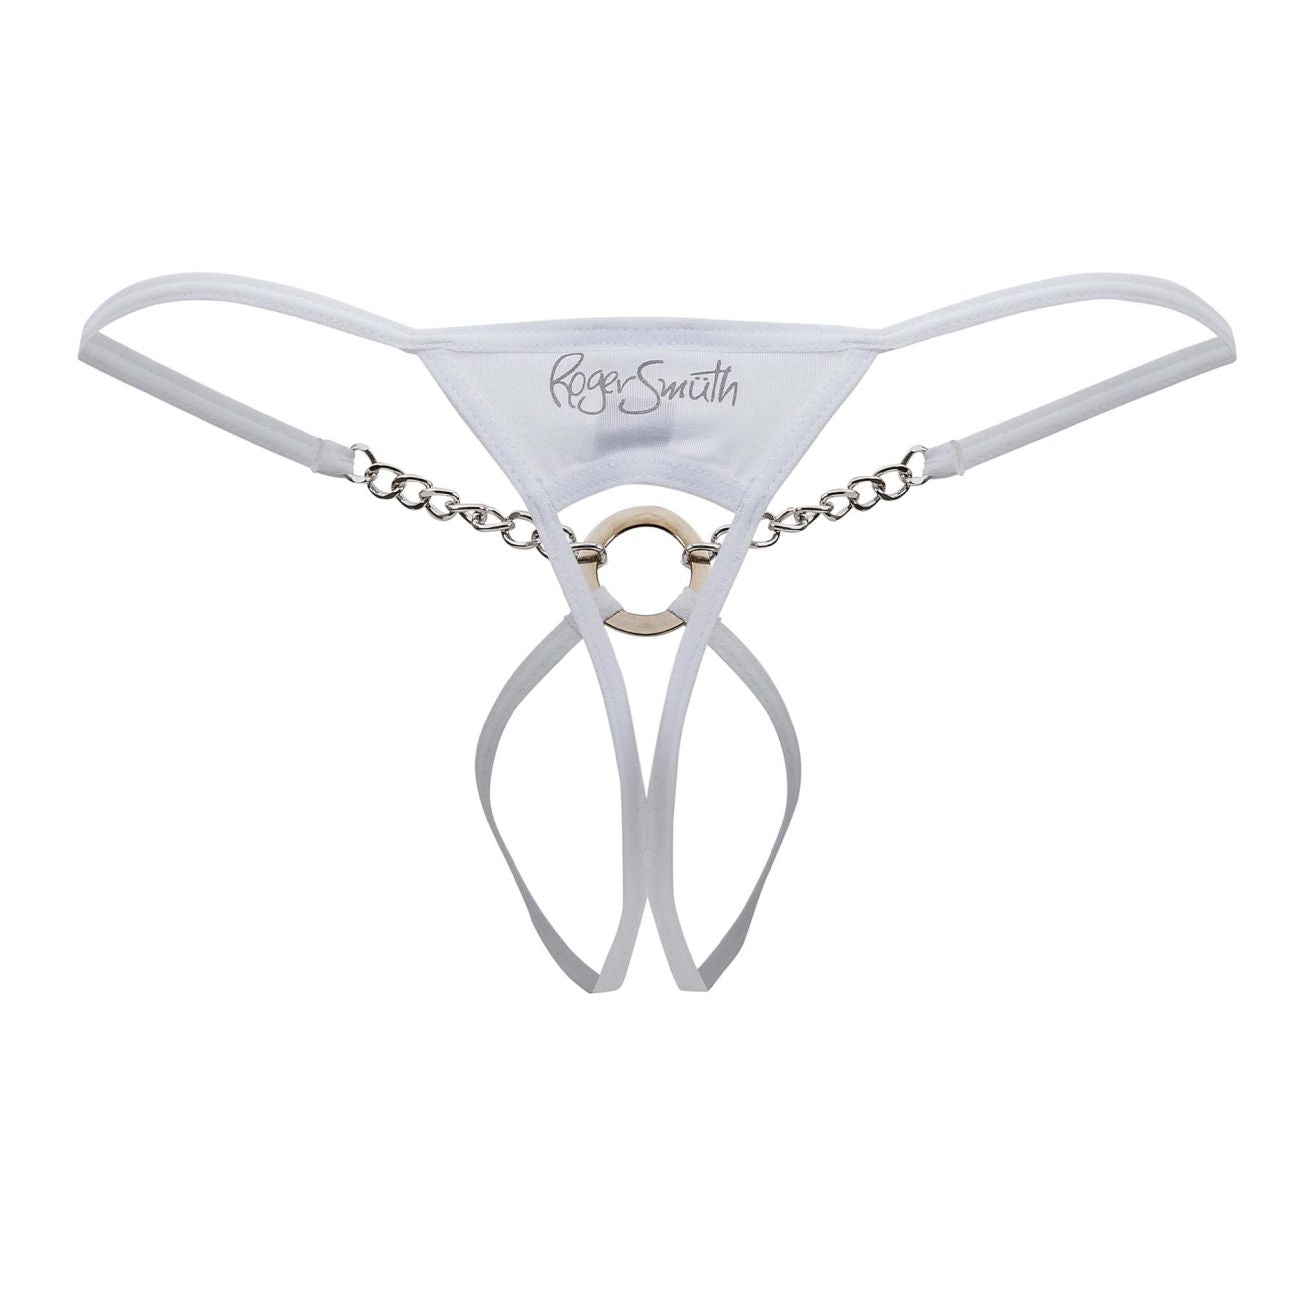 Roger Smuth RS081 Thongs White